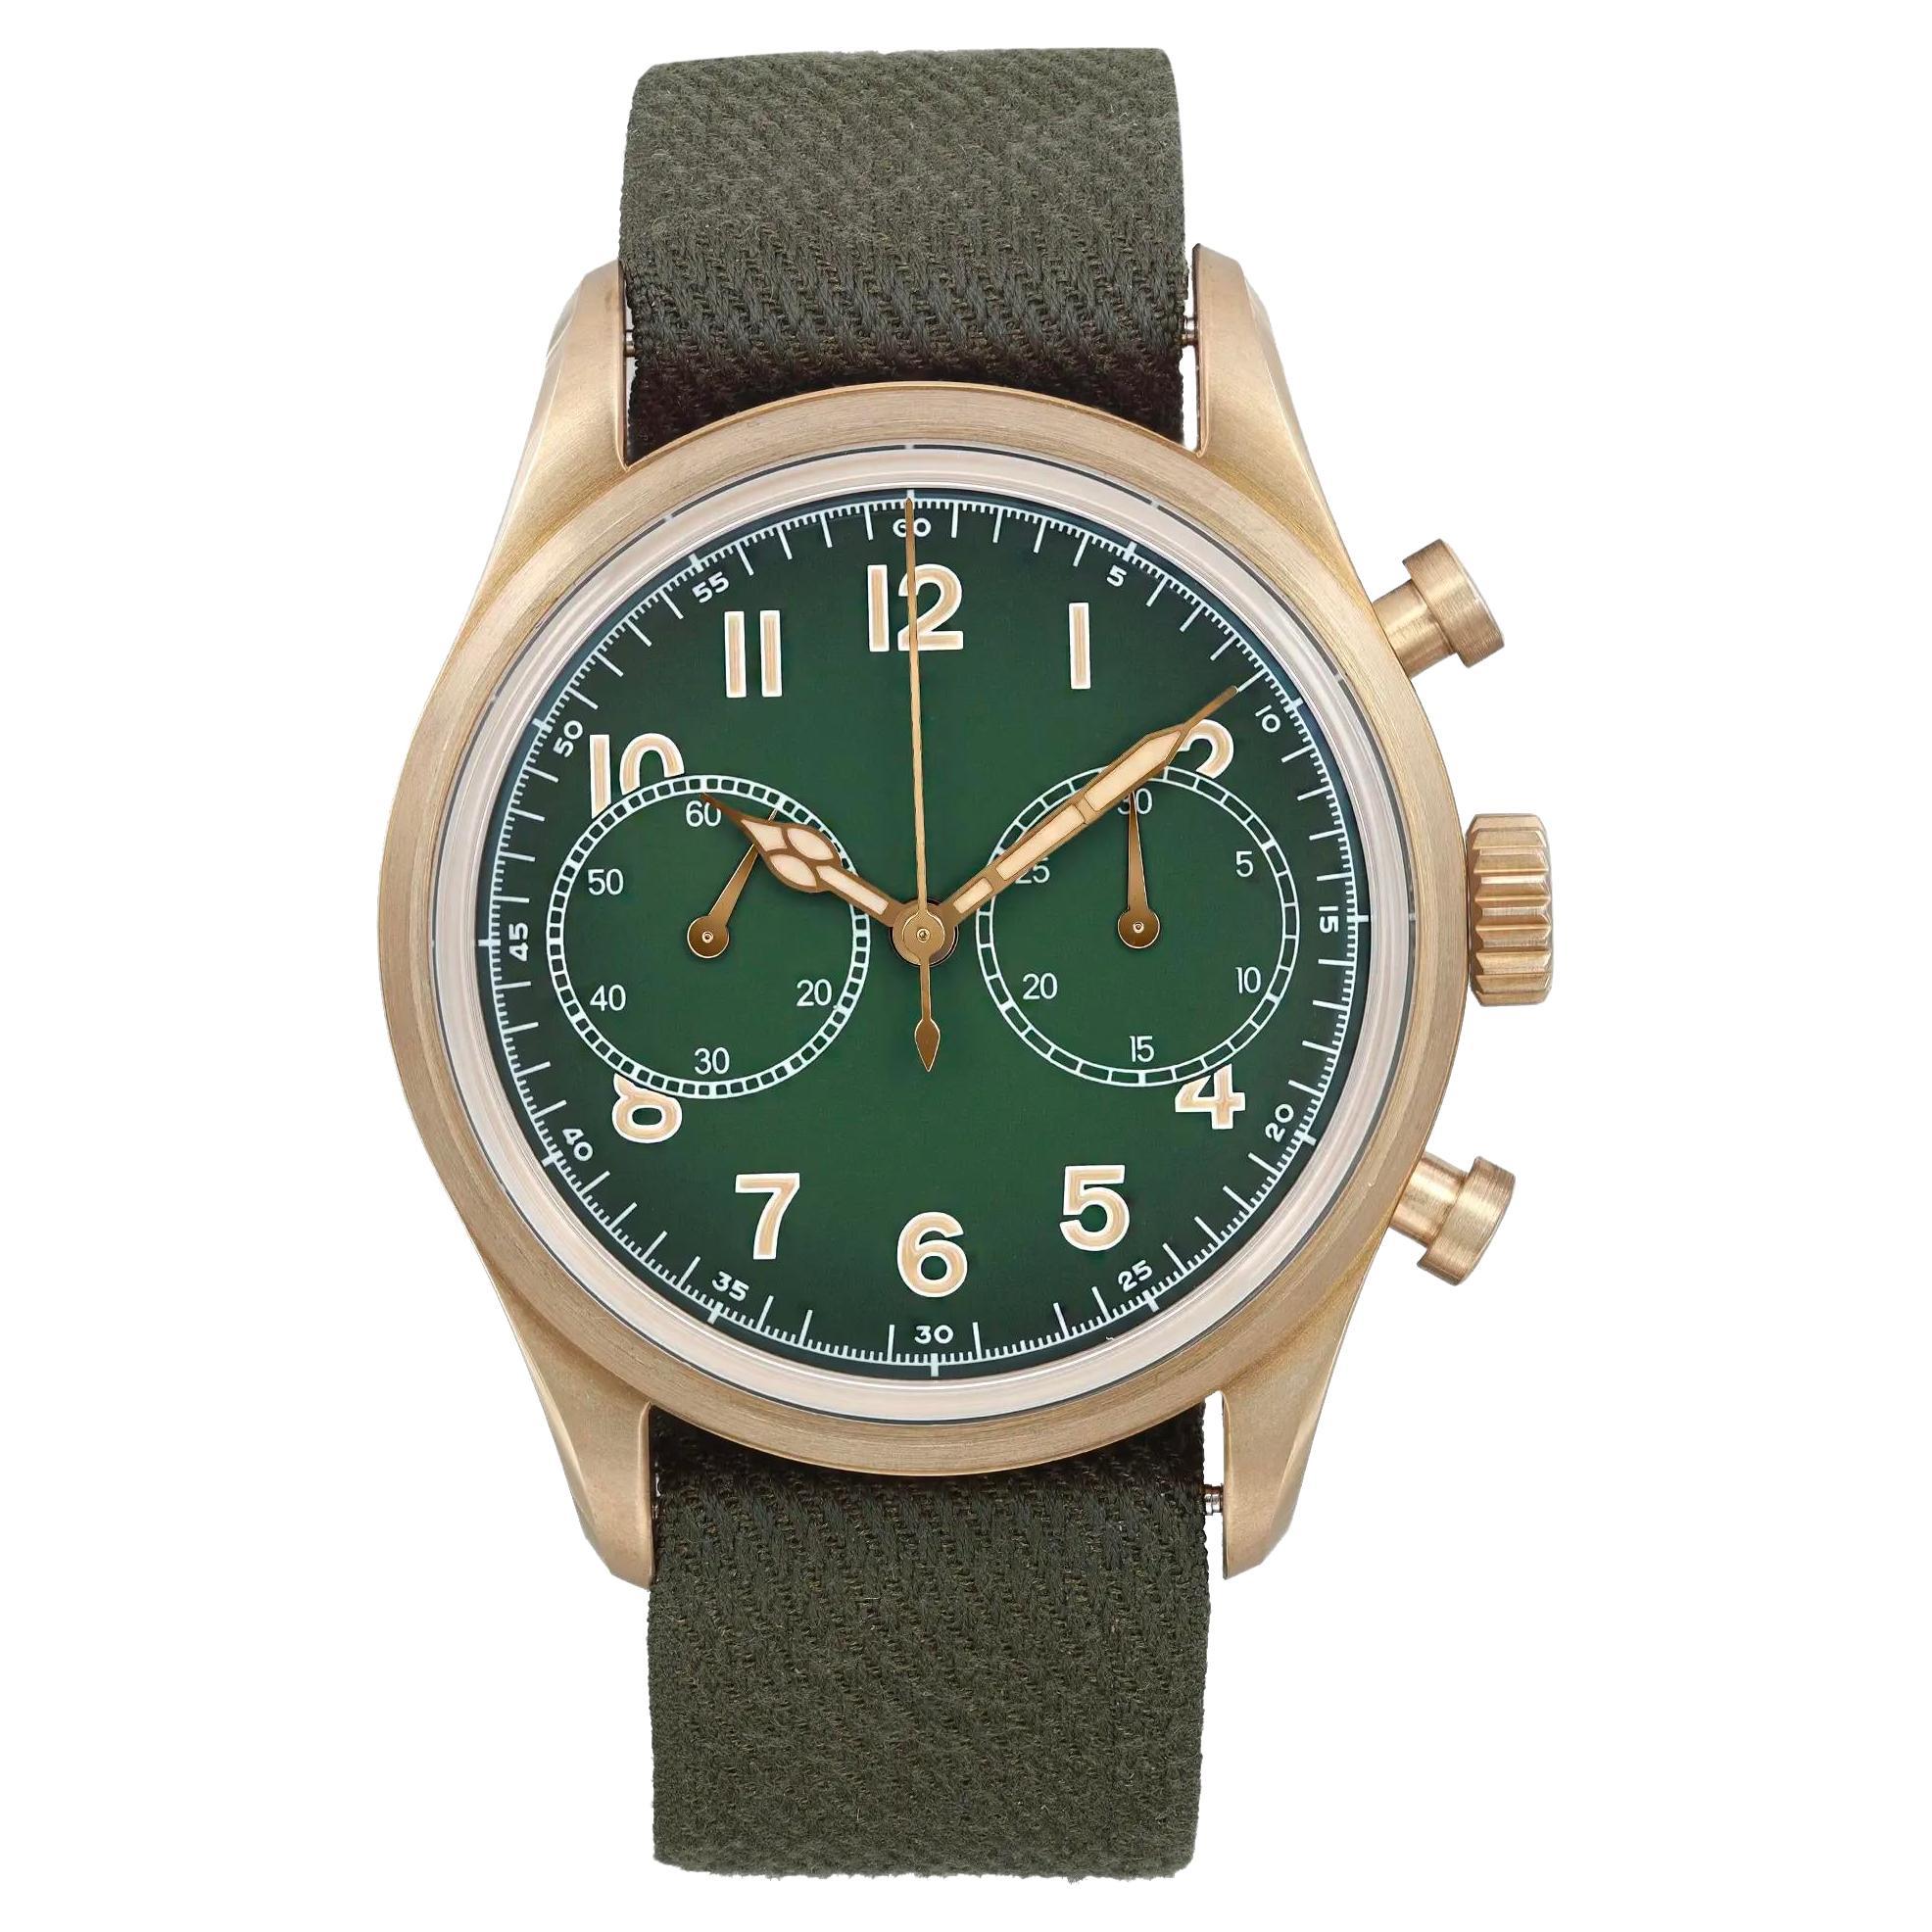 Montblanc 1858 42mm Chronograph Bronze Green Dial Ltd Edition Men Watch Mb119908 For Sale